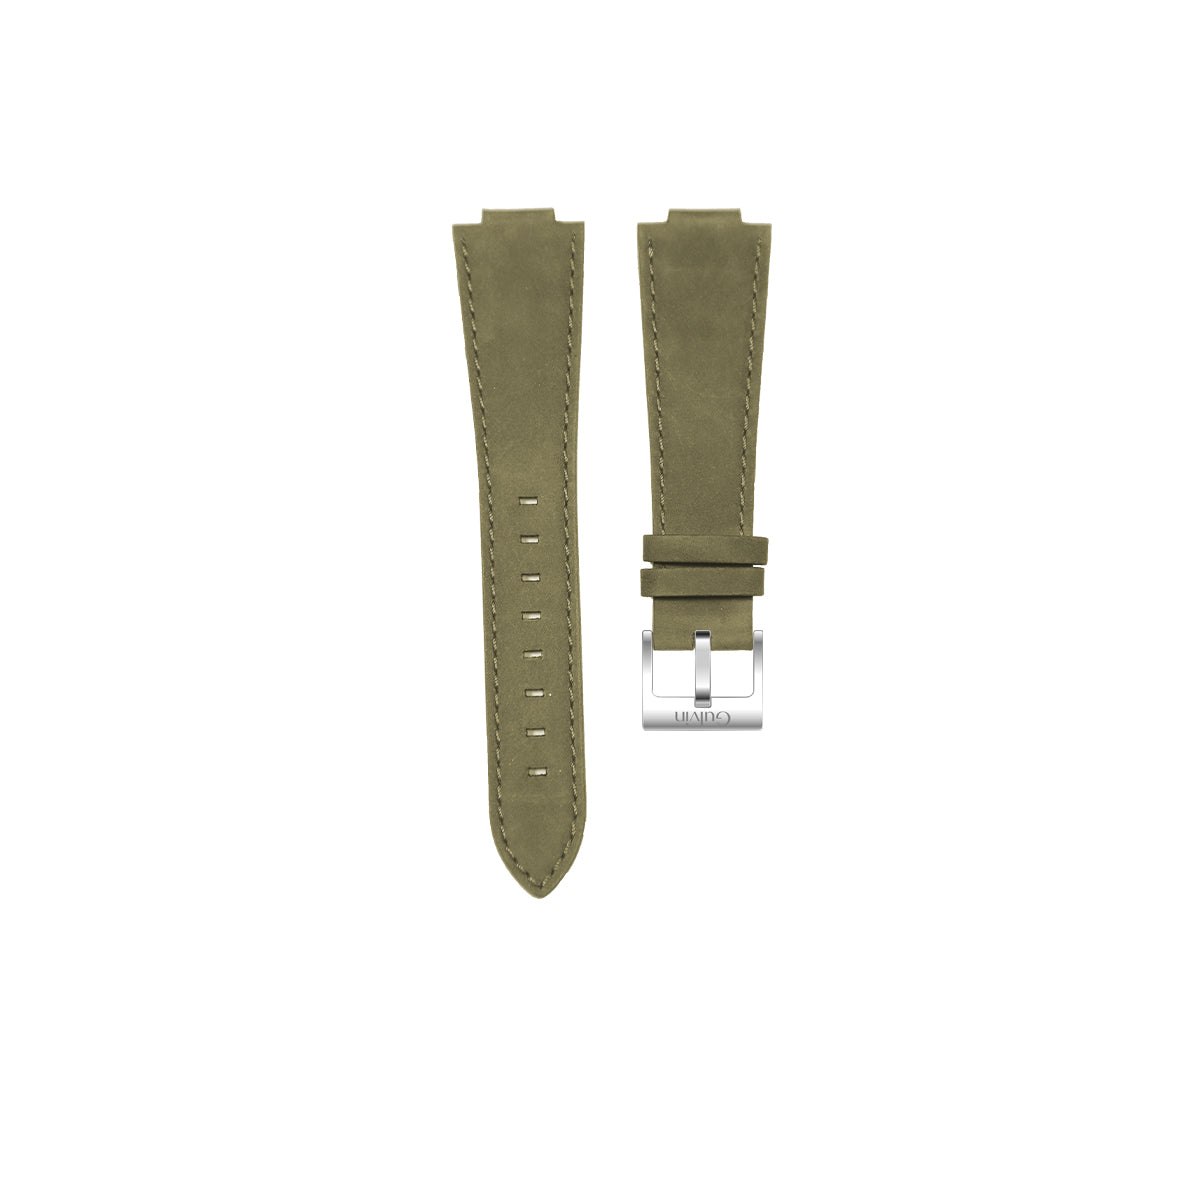 Gulvin gray green leather strap - Millions only